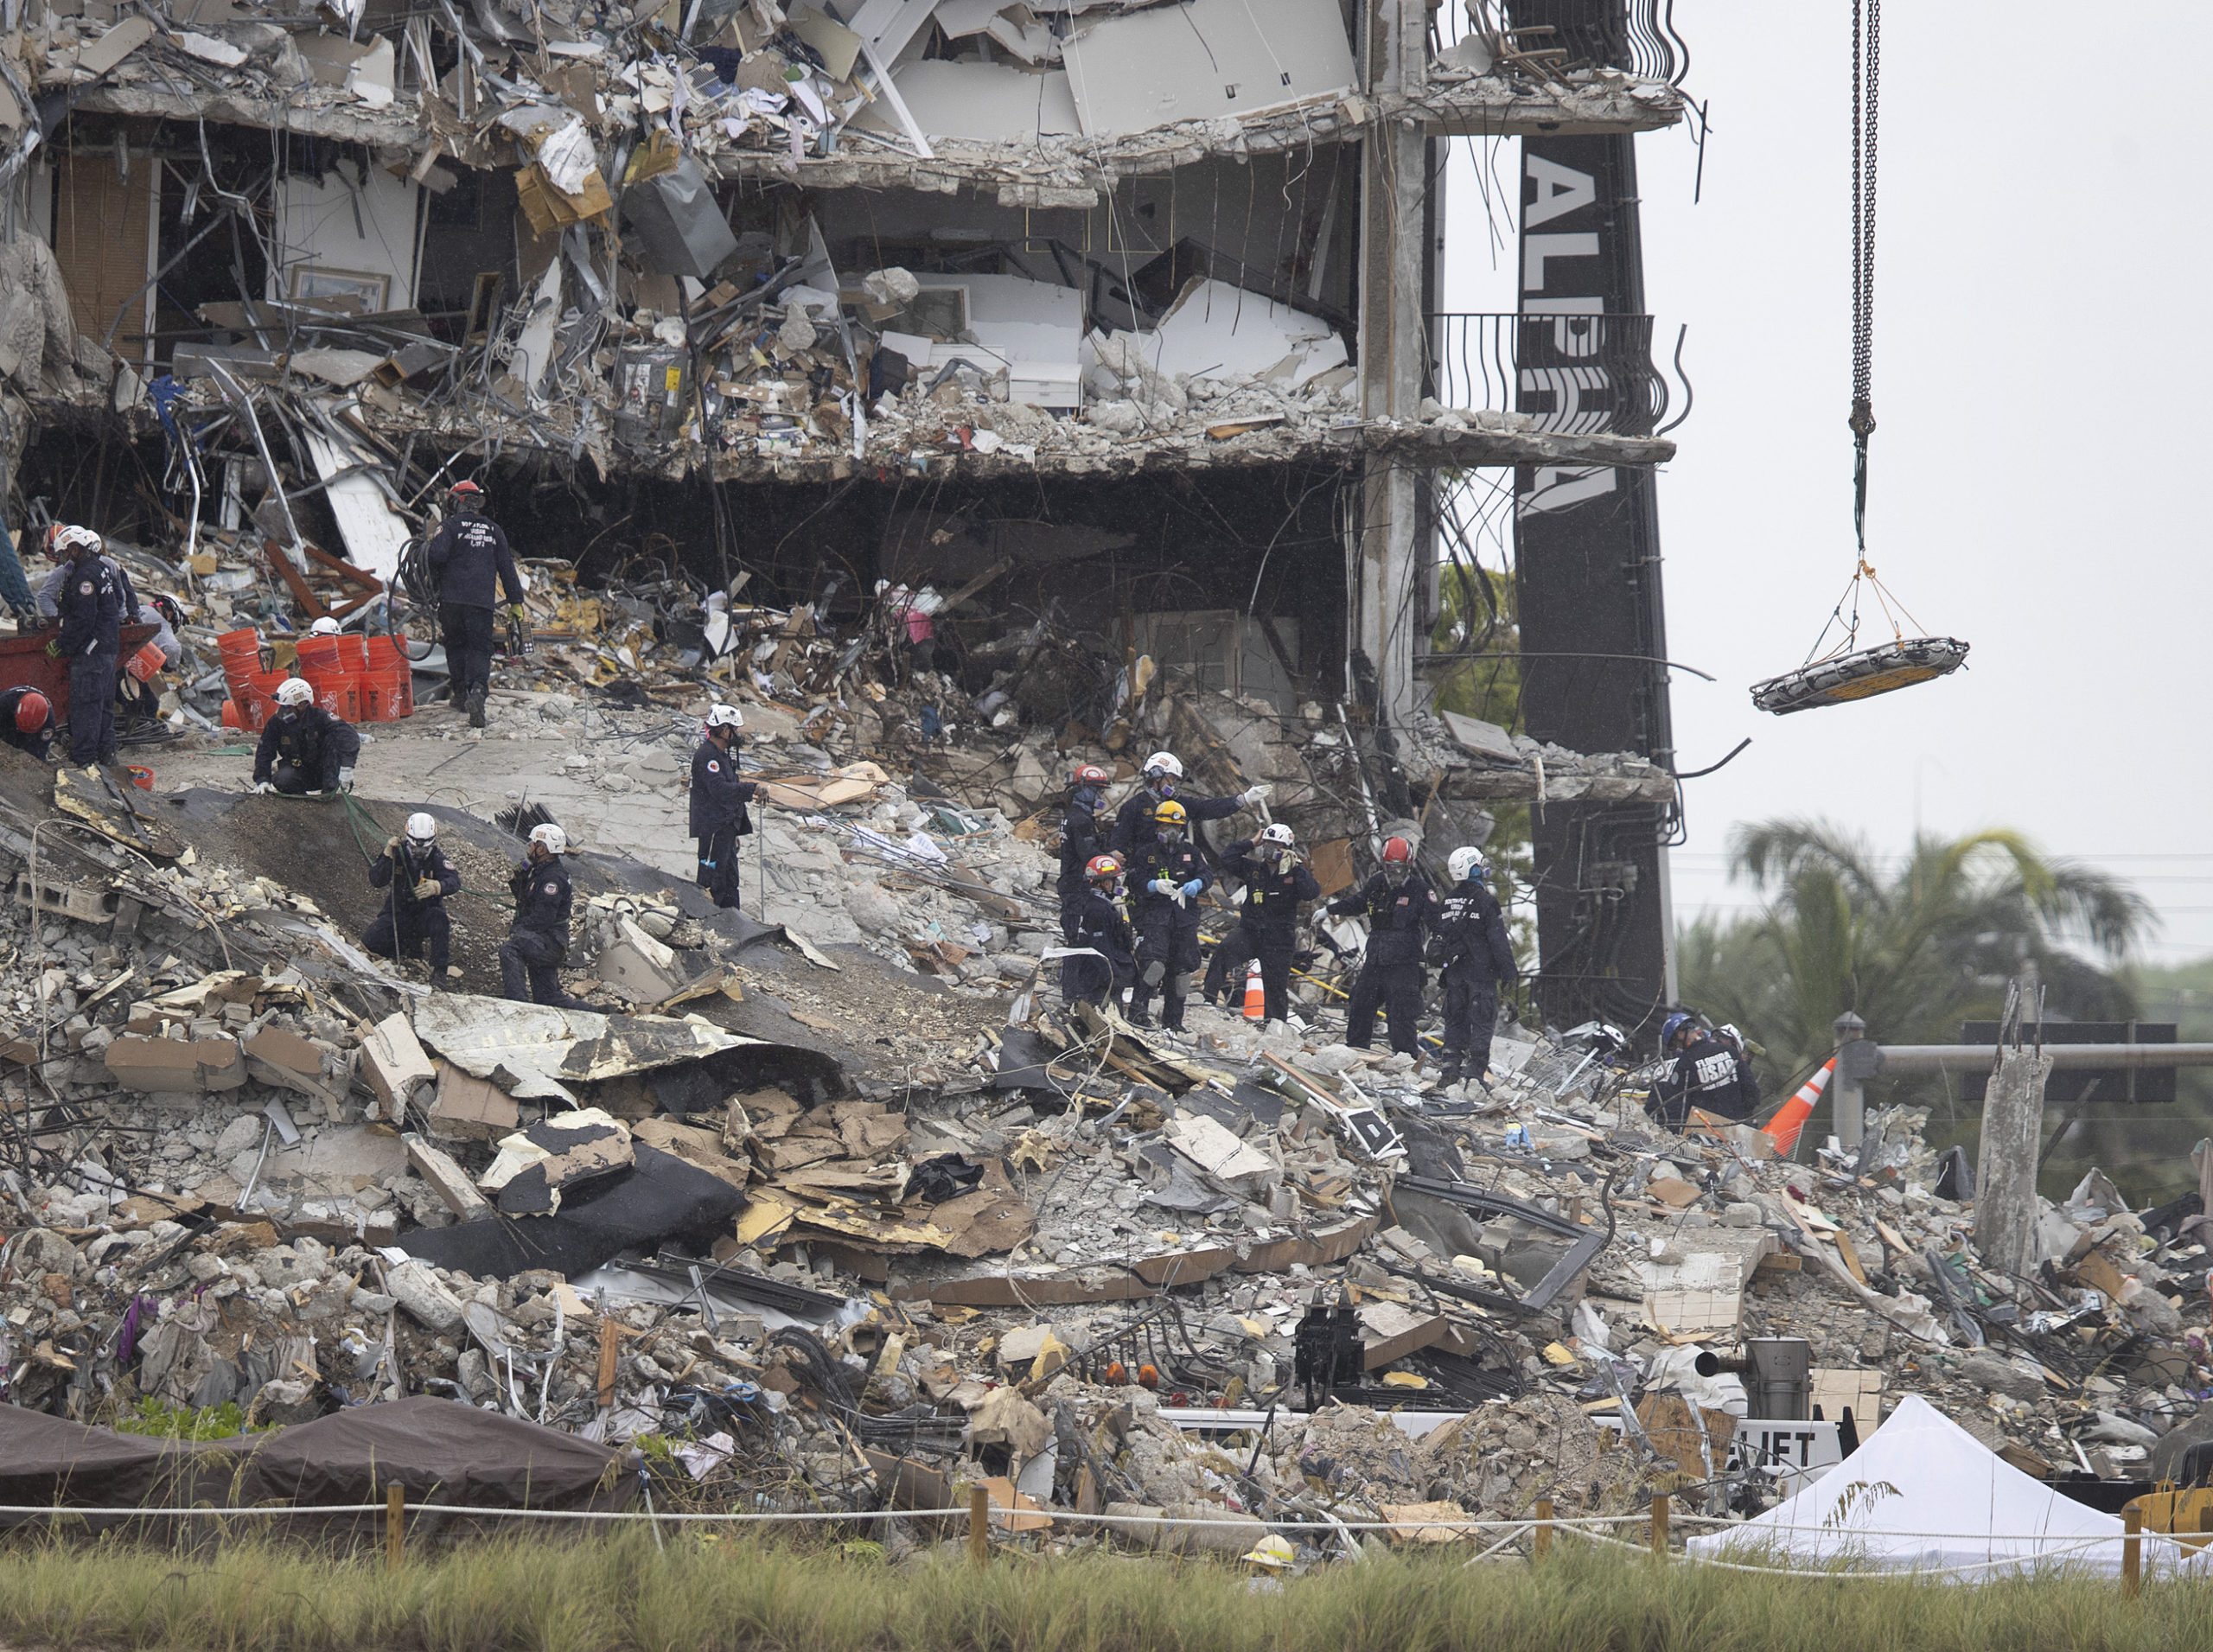 As Search and Rescue personnel continue to look through the rubble a crane removes a stretcher from the partially collapsed 12-story Champlain Towers South condo building on June 28, 2021 in Surfside, Florida. (Joe Raedle/Getty Images)